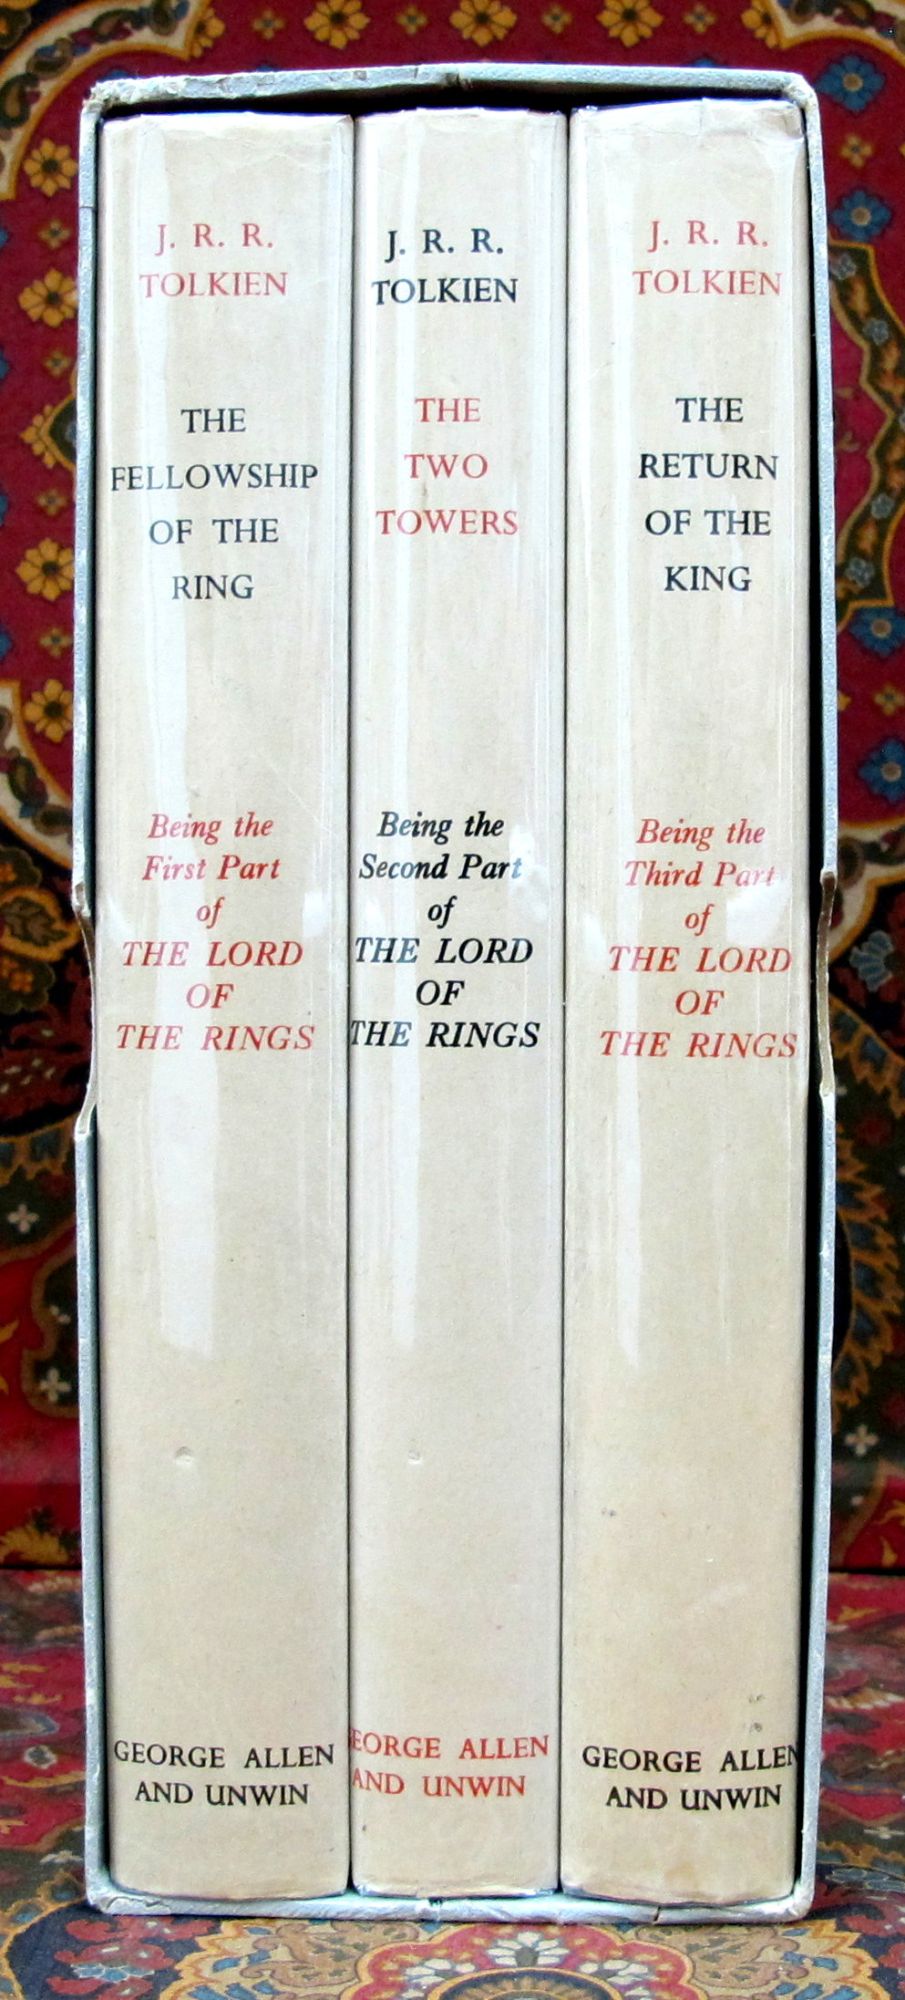 The Lord of the Rings, 1st UK Edition with Dustjackets and Custom Leather  Slipcase by J. R. R. Tolkien on The Tolkien Bookshelf